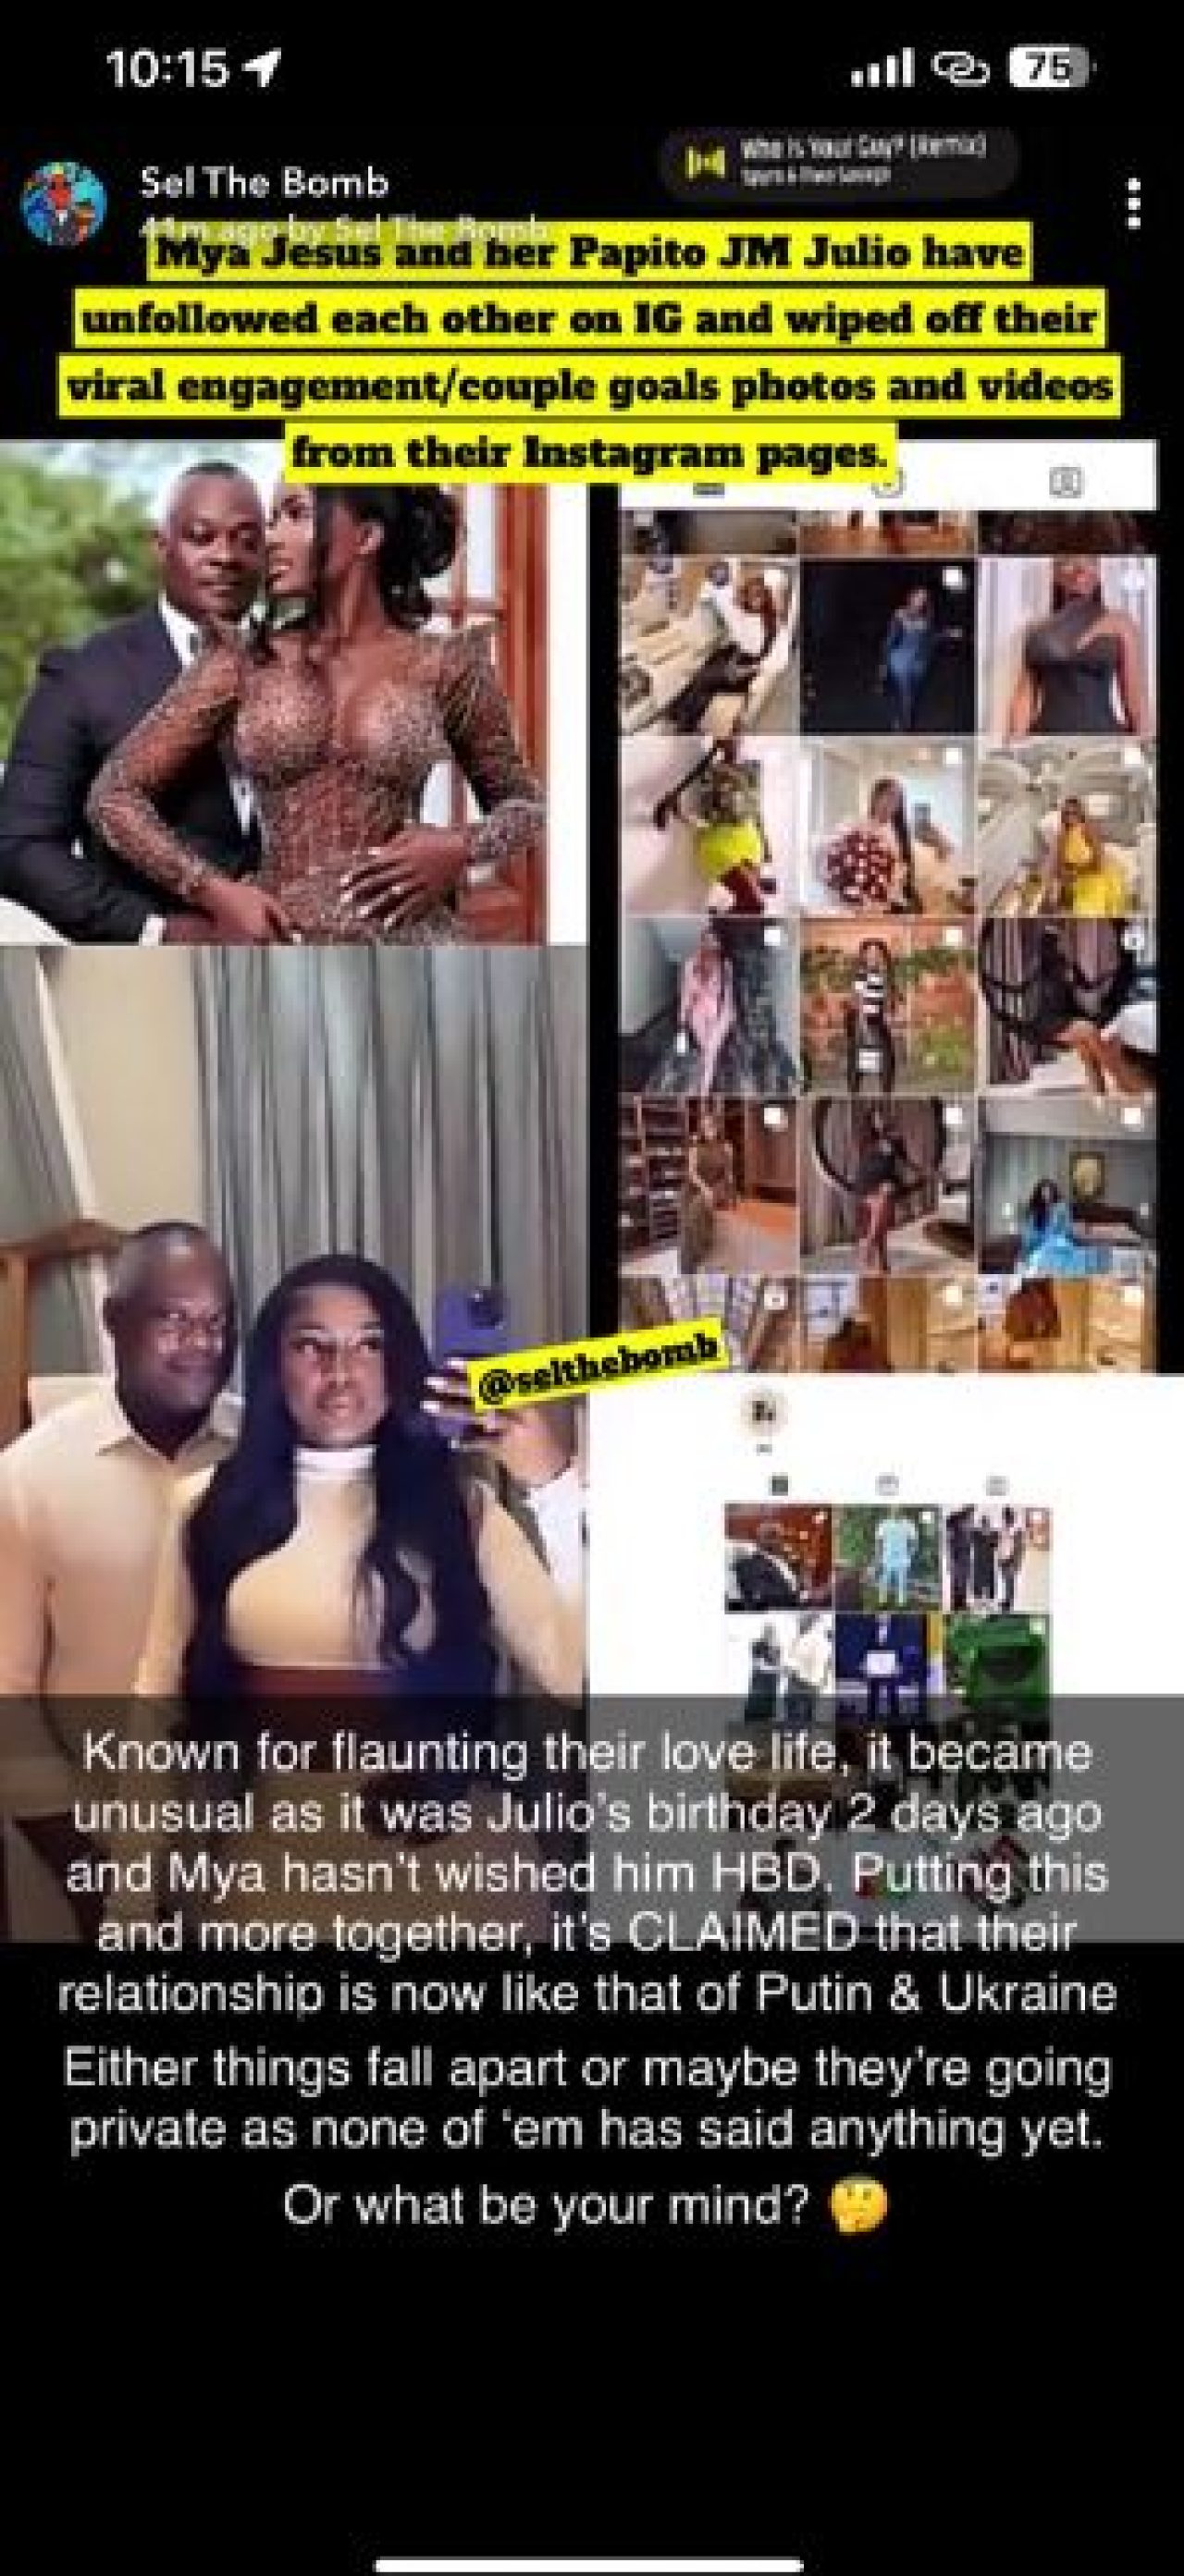 Socialite Mya Jesus’s one-month marriage to 59 Year old Beau allegedly collapses, unfollows each other and deletes photos AdvertAfrica News on afronewswire.com: Amplifying Africa's Voice | afronewswire.com | Breaking News & Stories